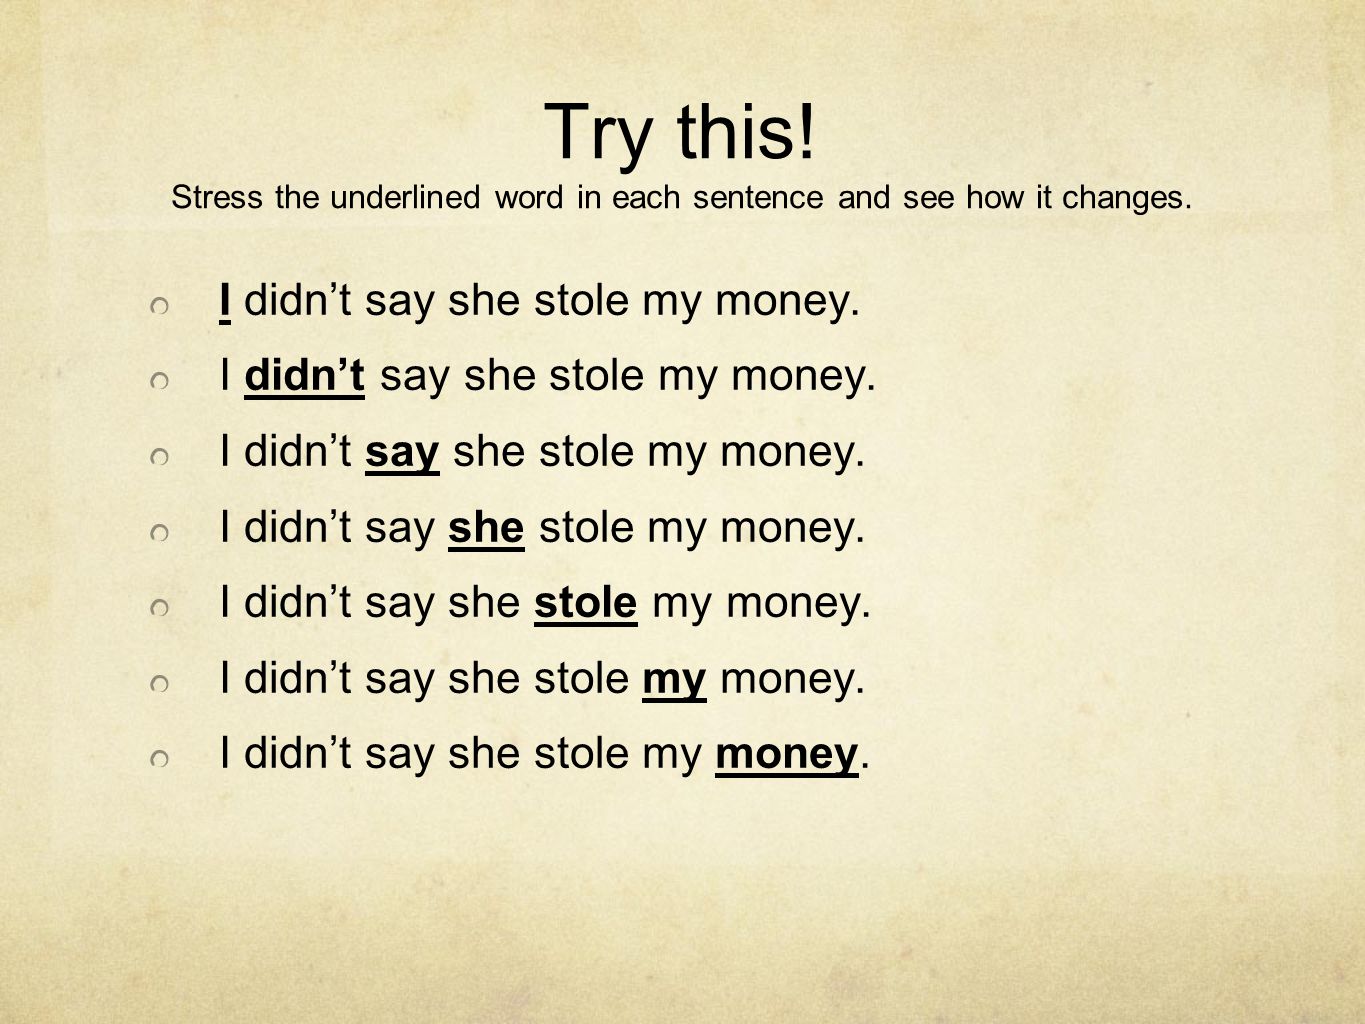 Try this! Stress the underlined word in each sentence and see how it changes.